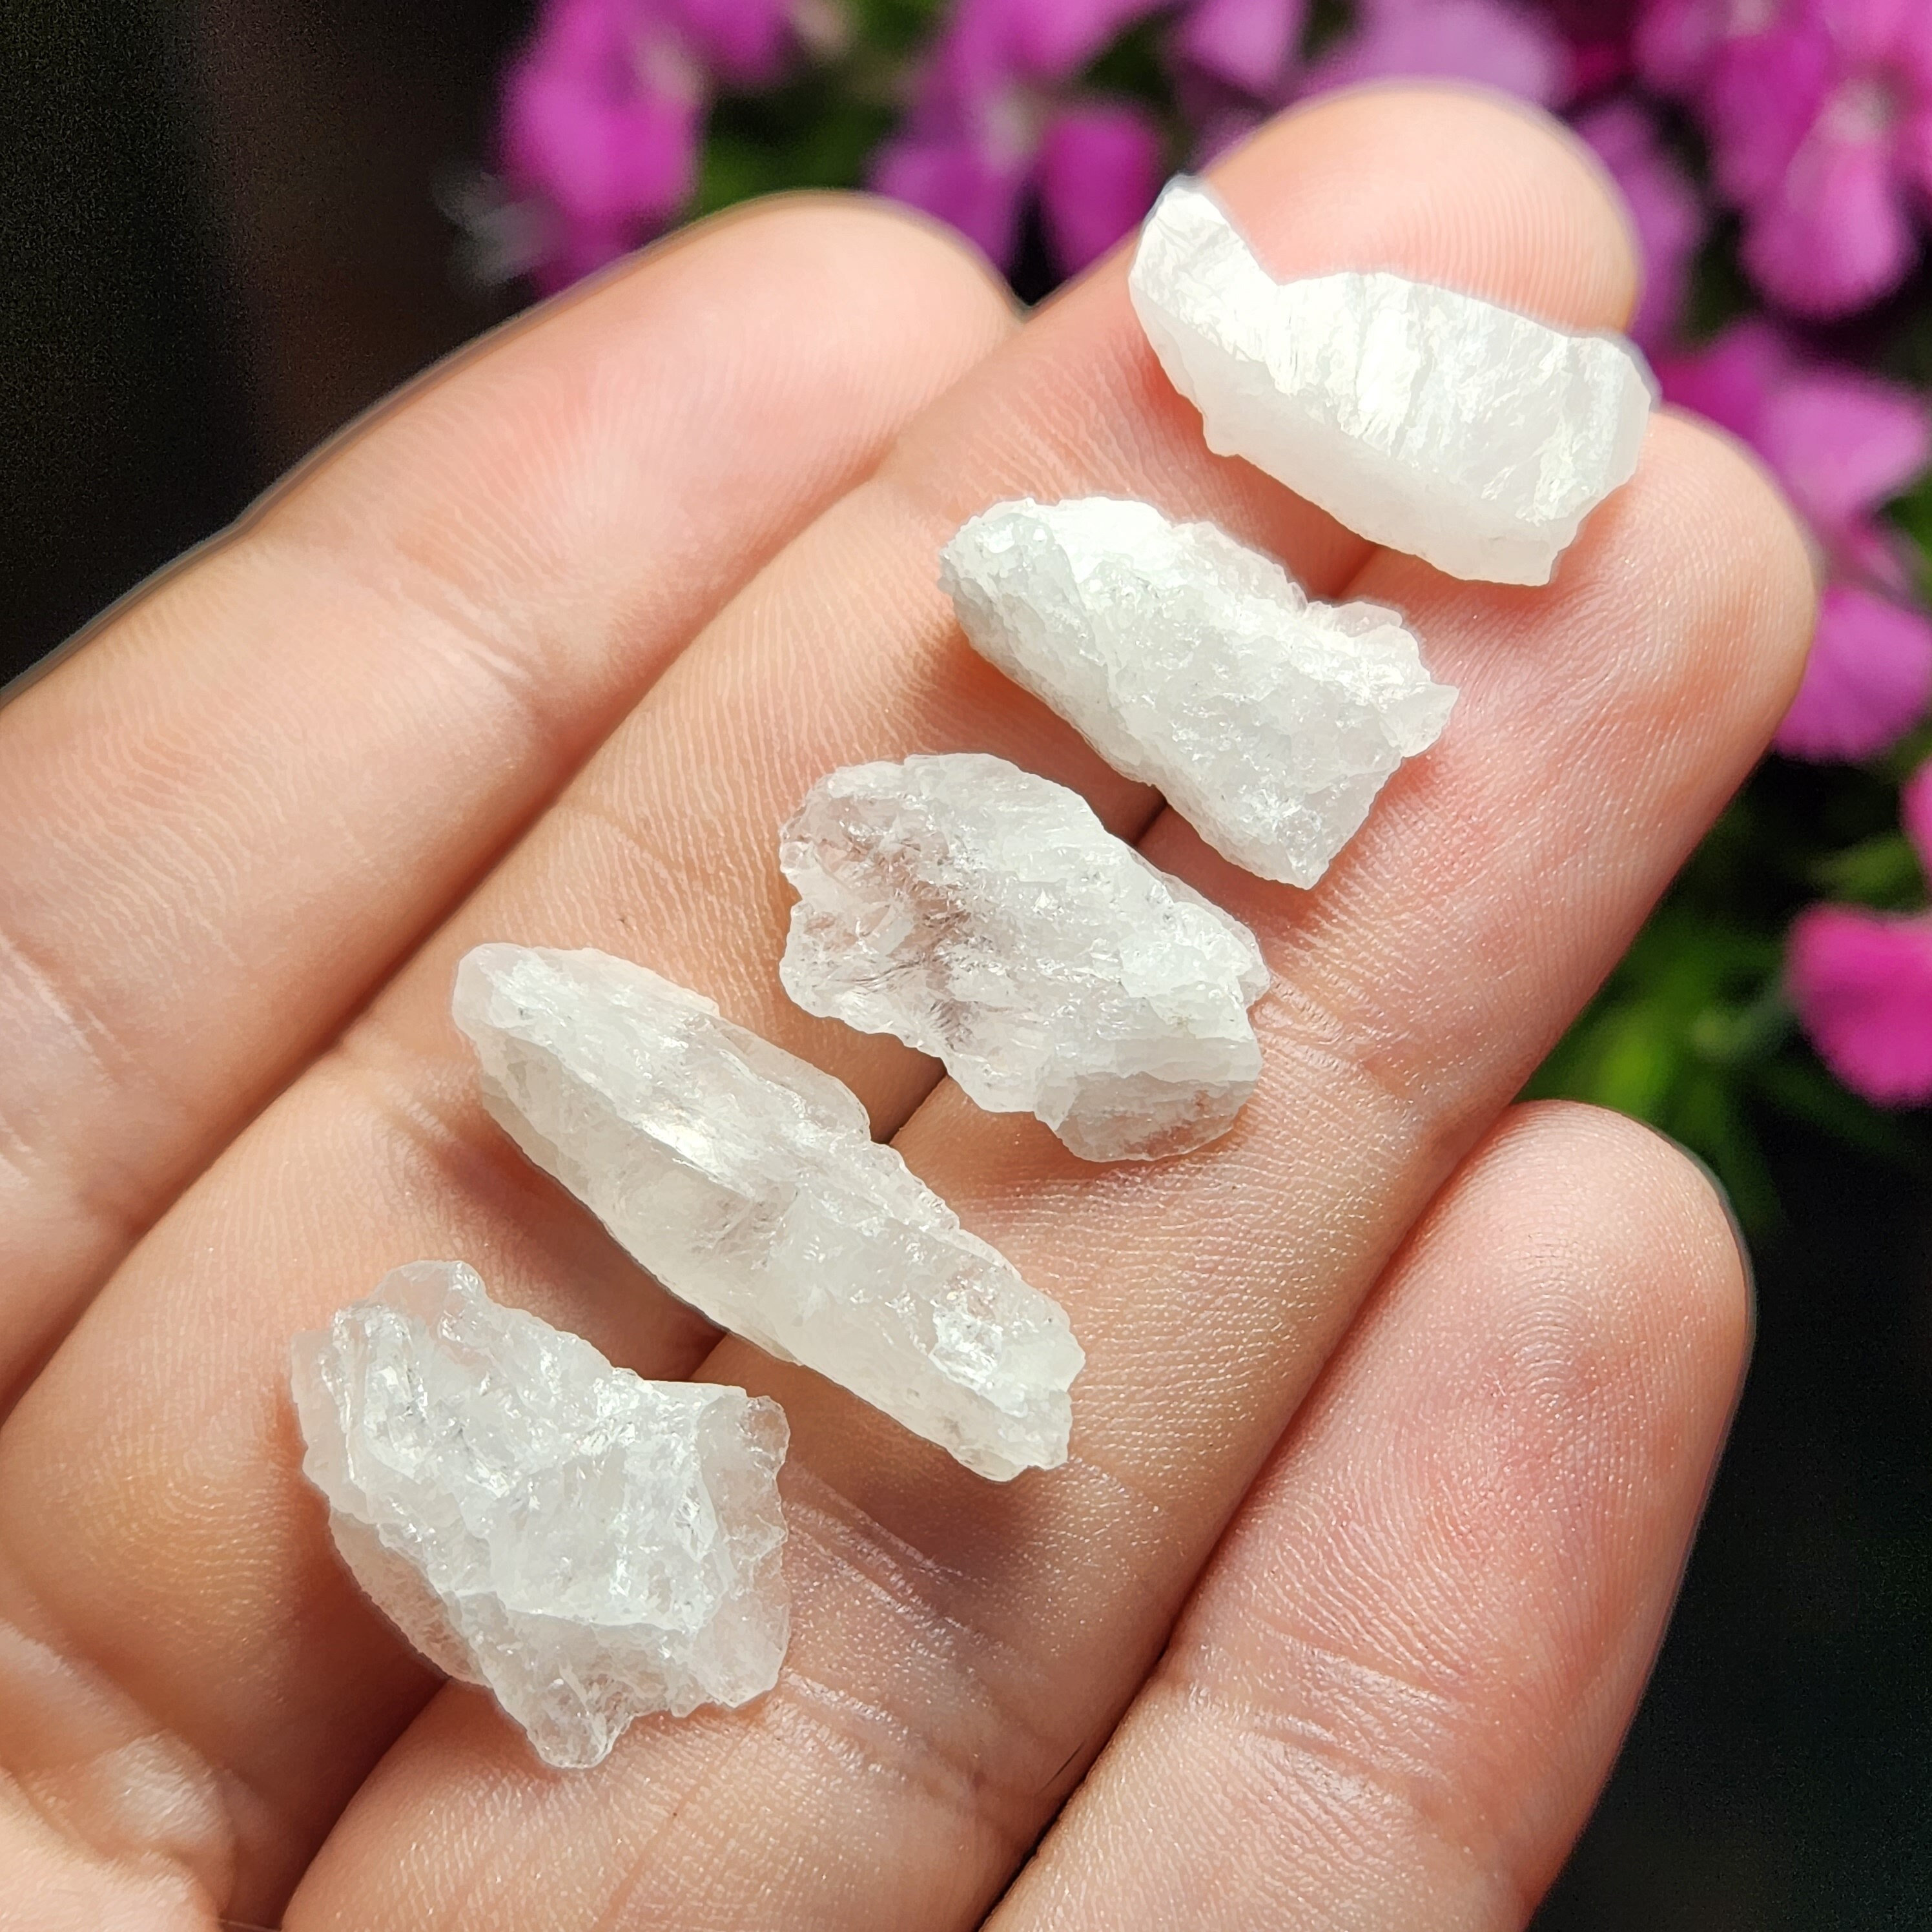 Natural Flame's Stone Crystal Quartz Carved Plane Healing Decorate 1pc